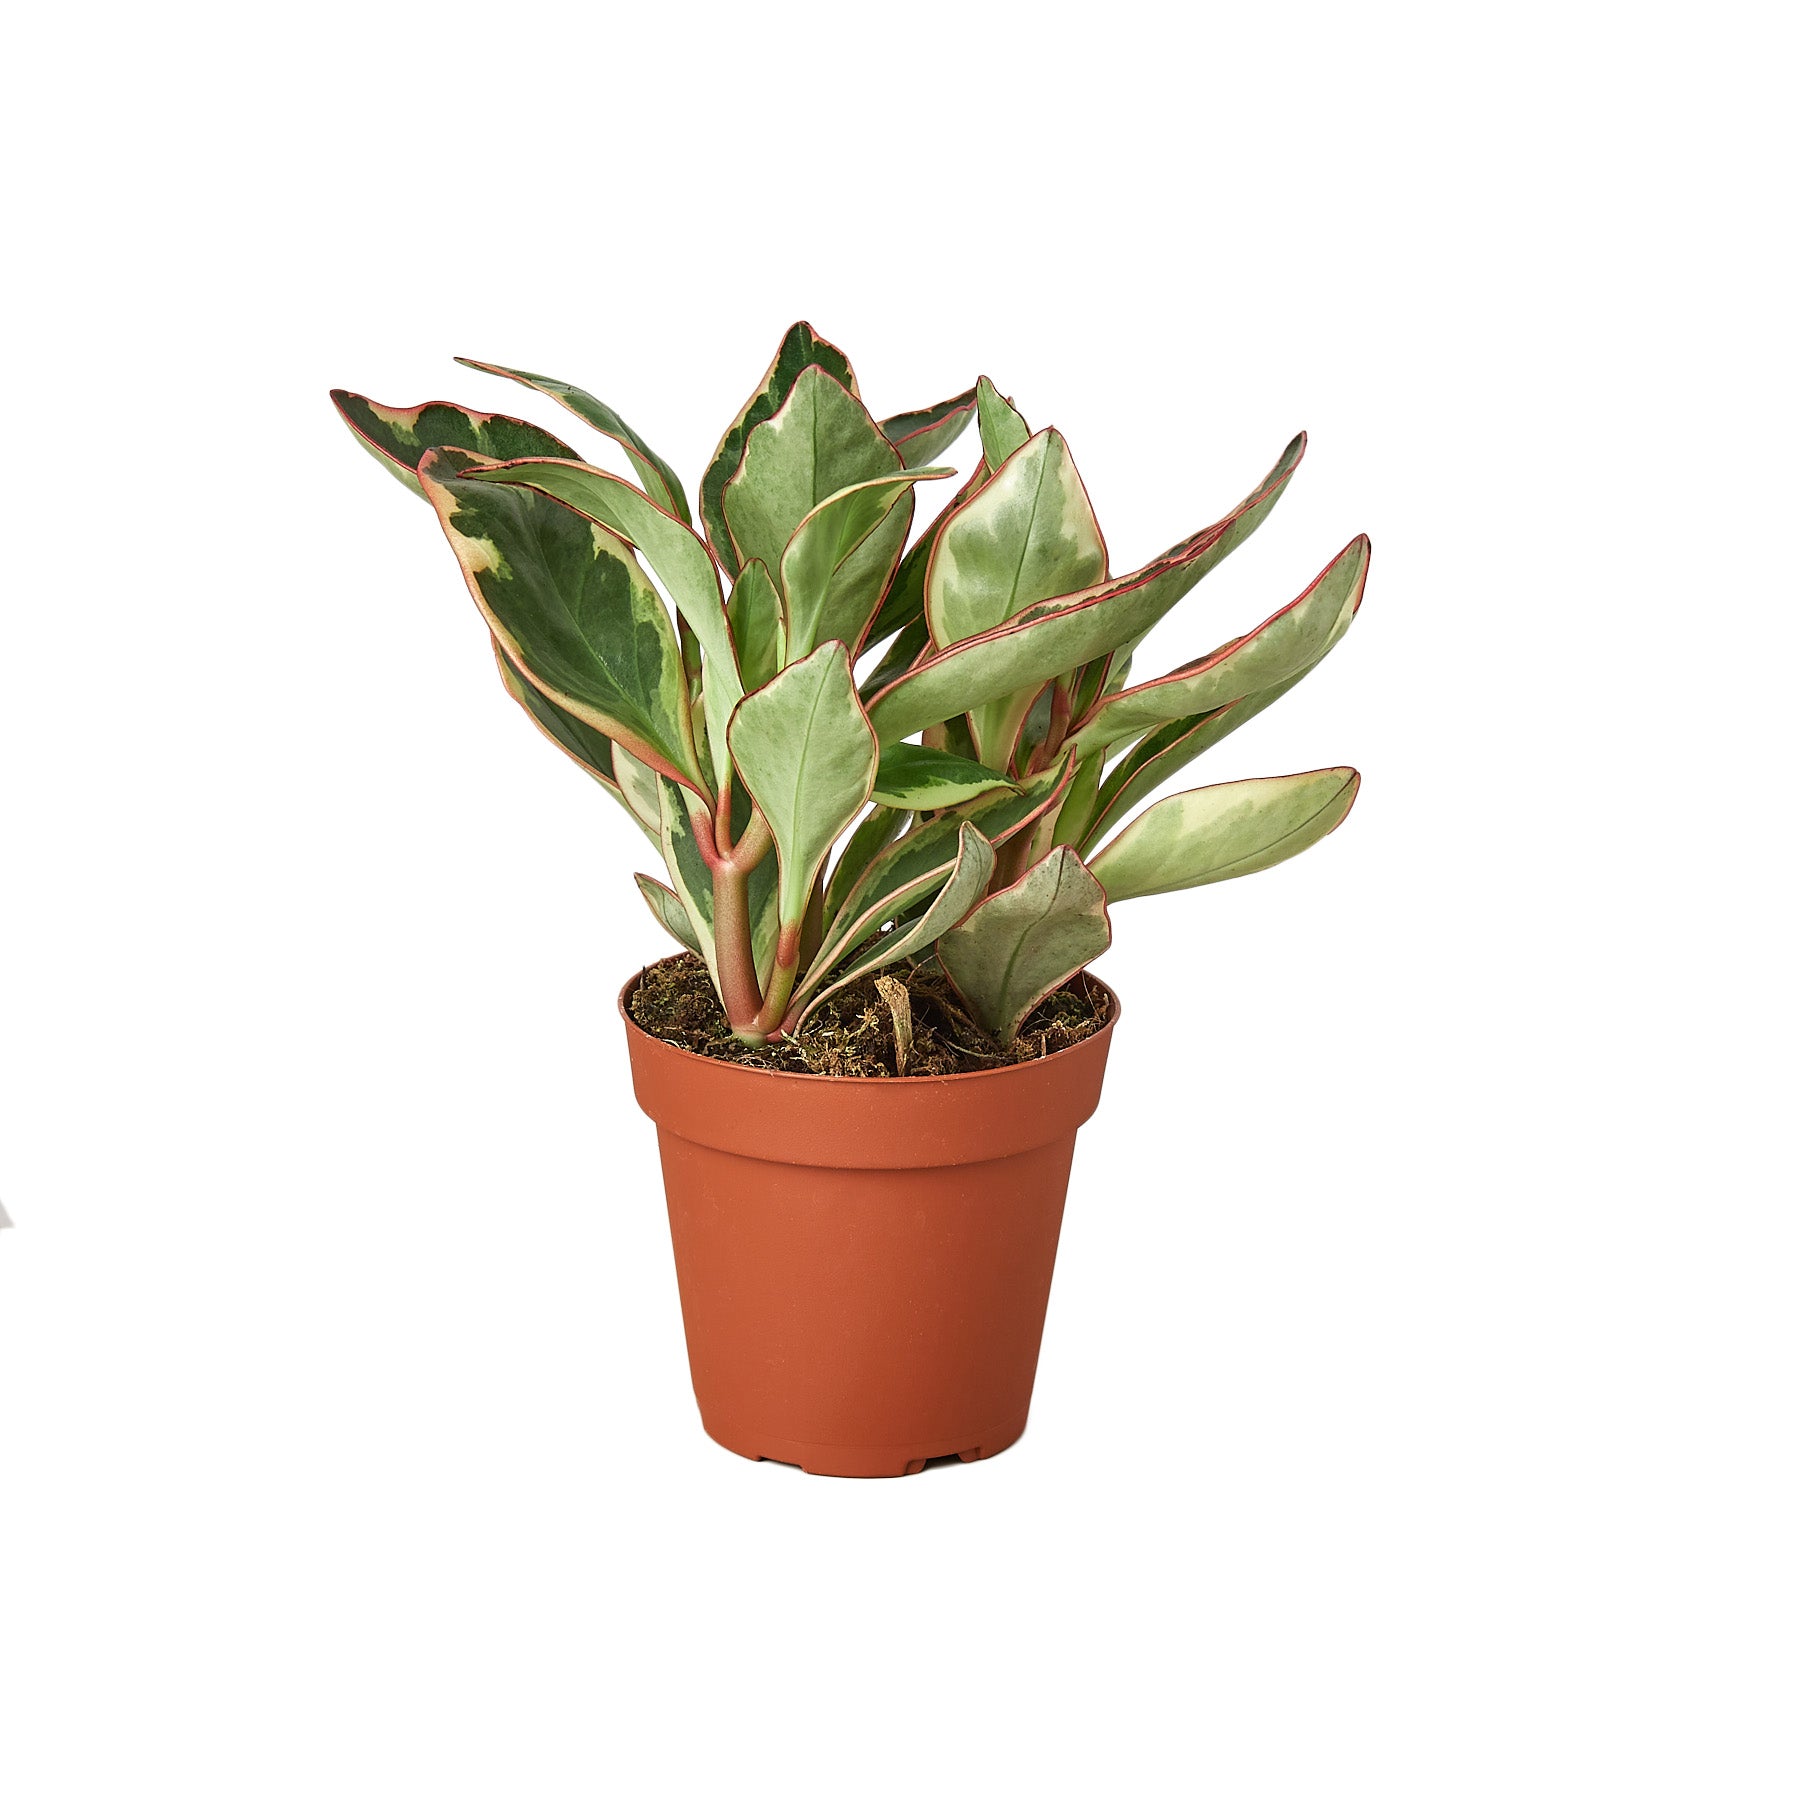 A plant in a brown pot on a white background available at a nearby garden center.